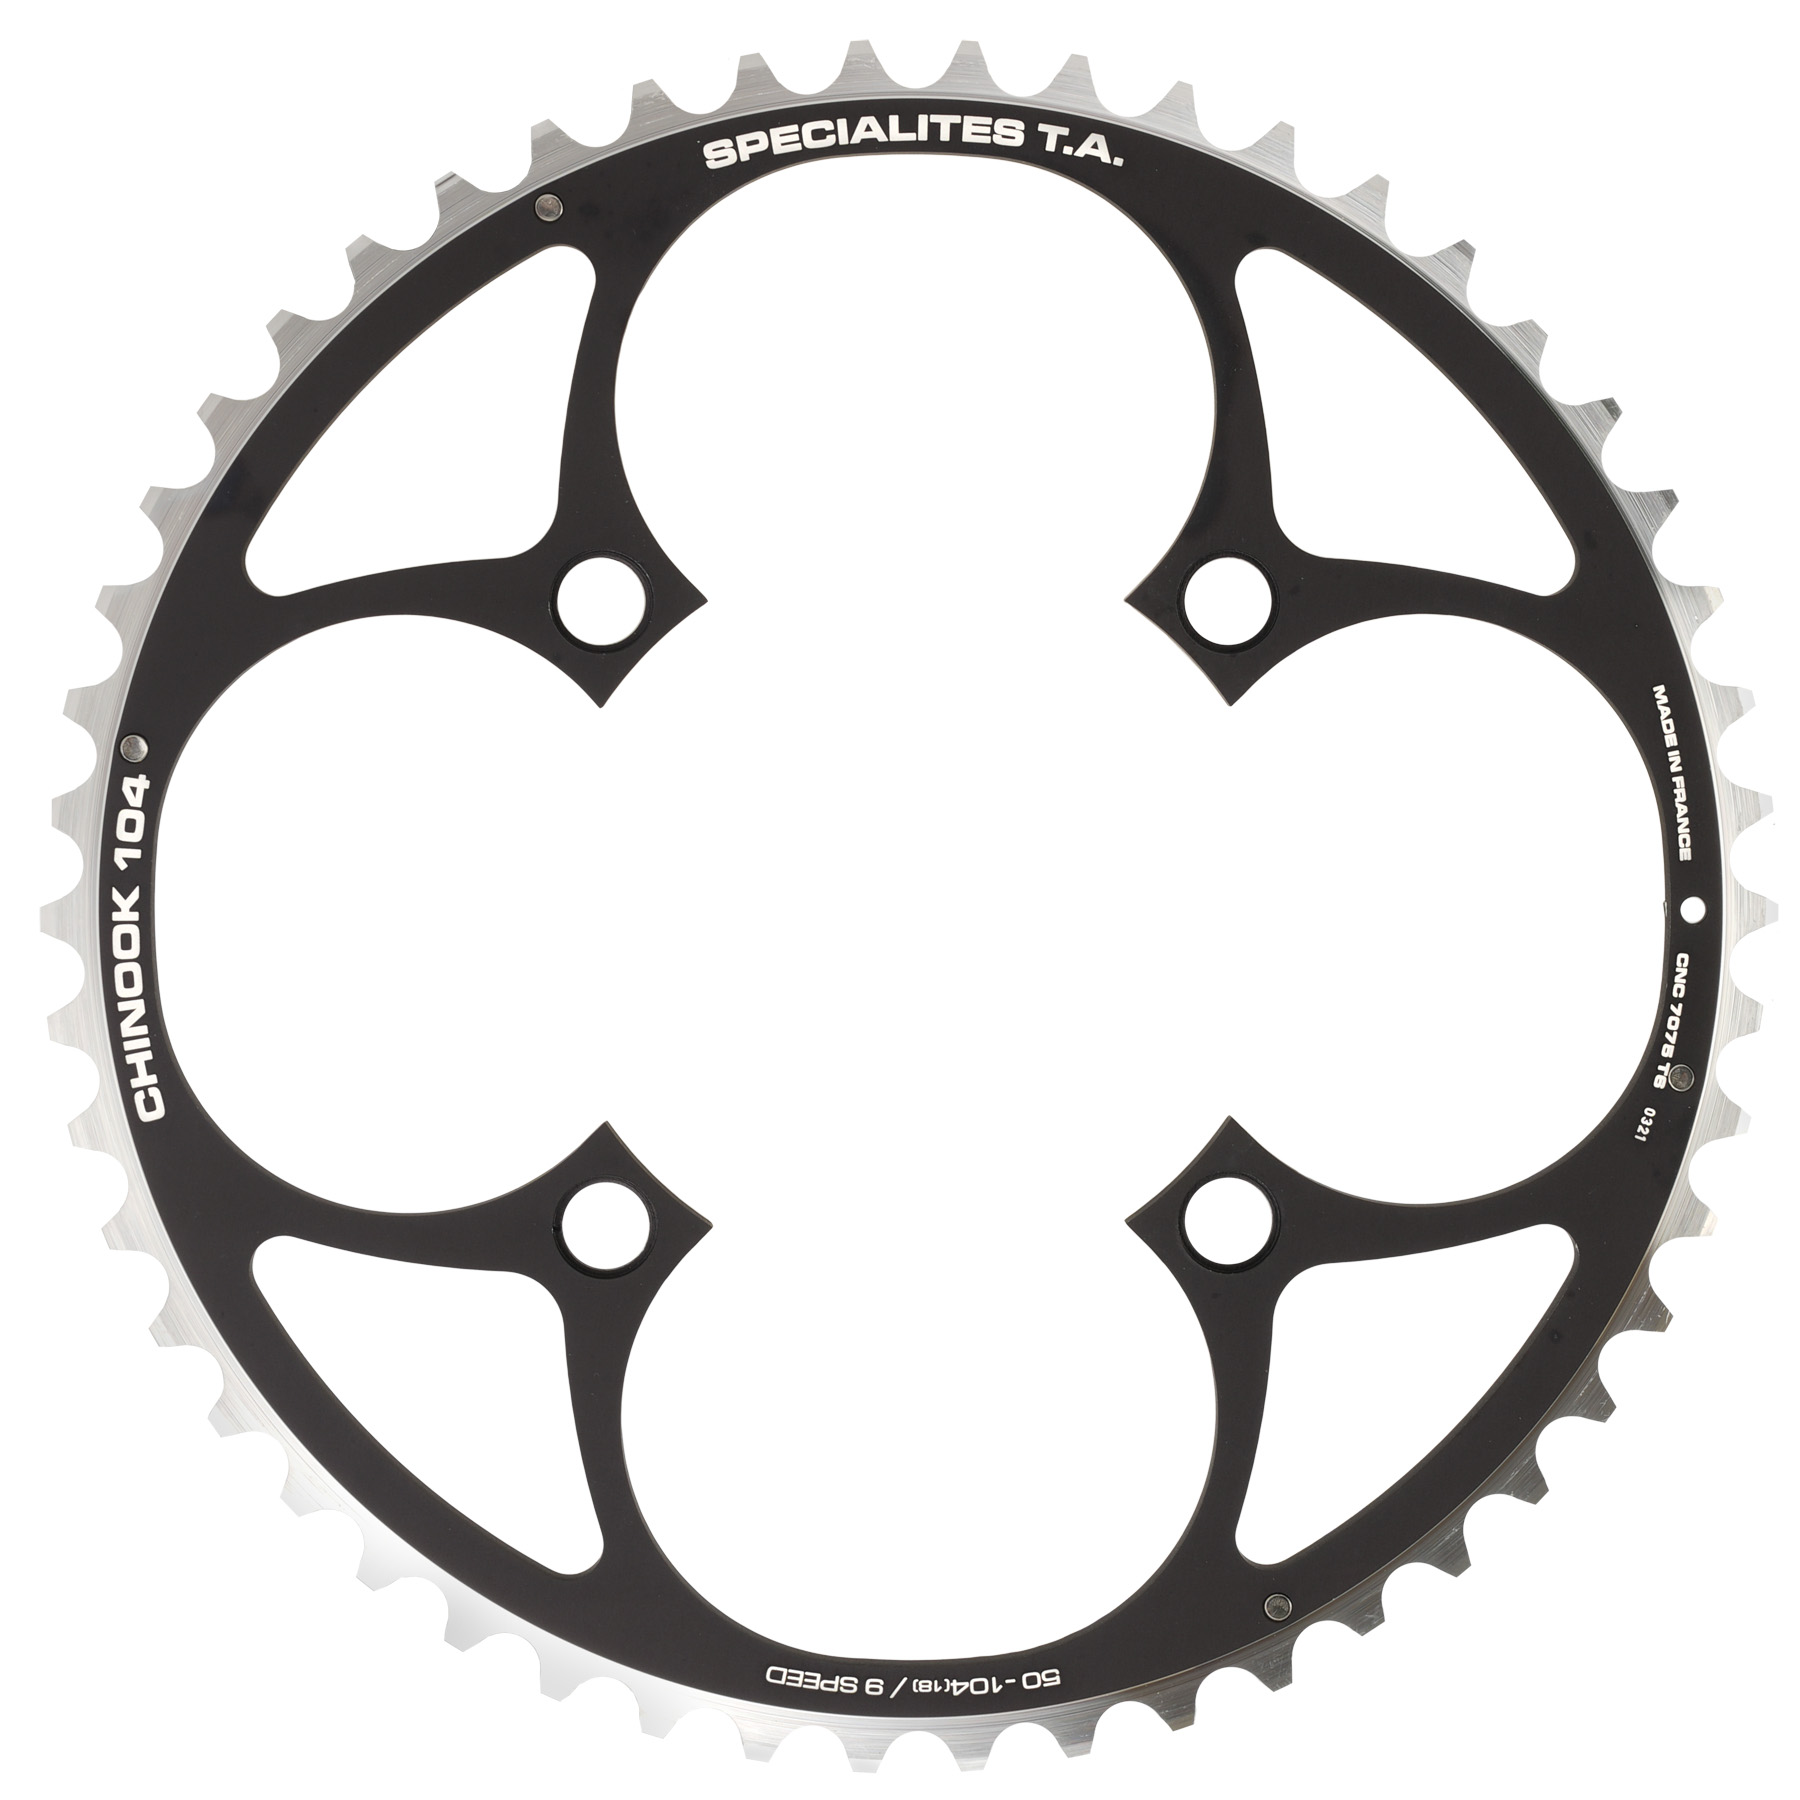 Picture of TA Specialites Chinook Chainring MTB 4-Arm 104mm 9-speed - different colors